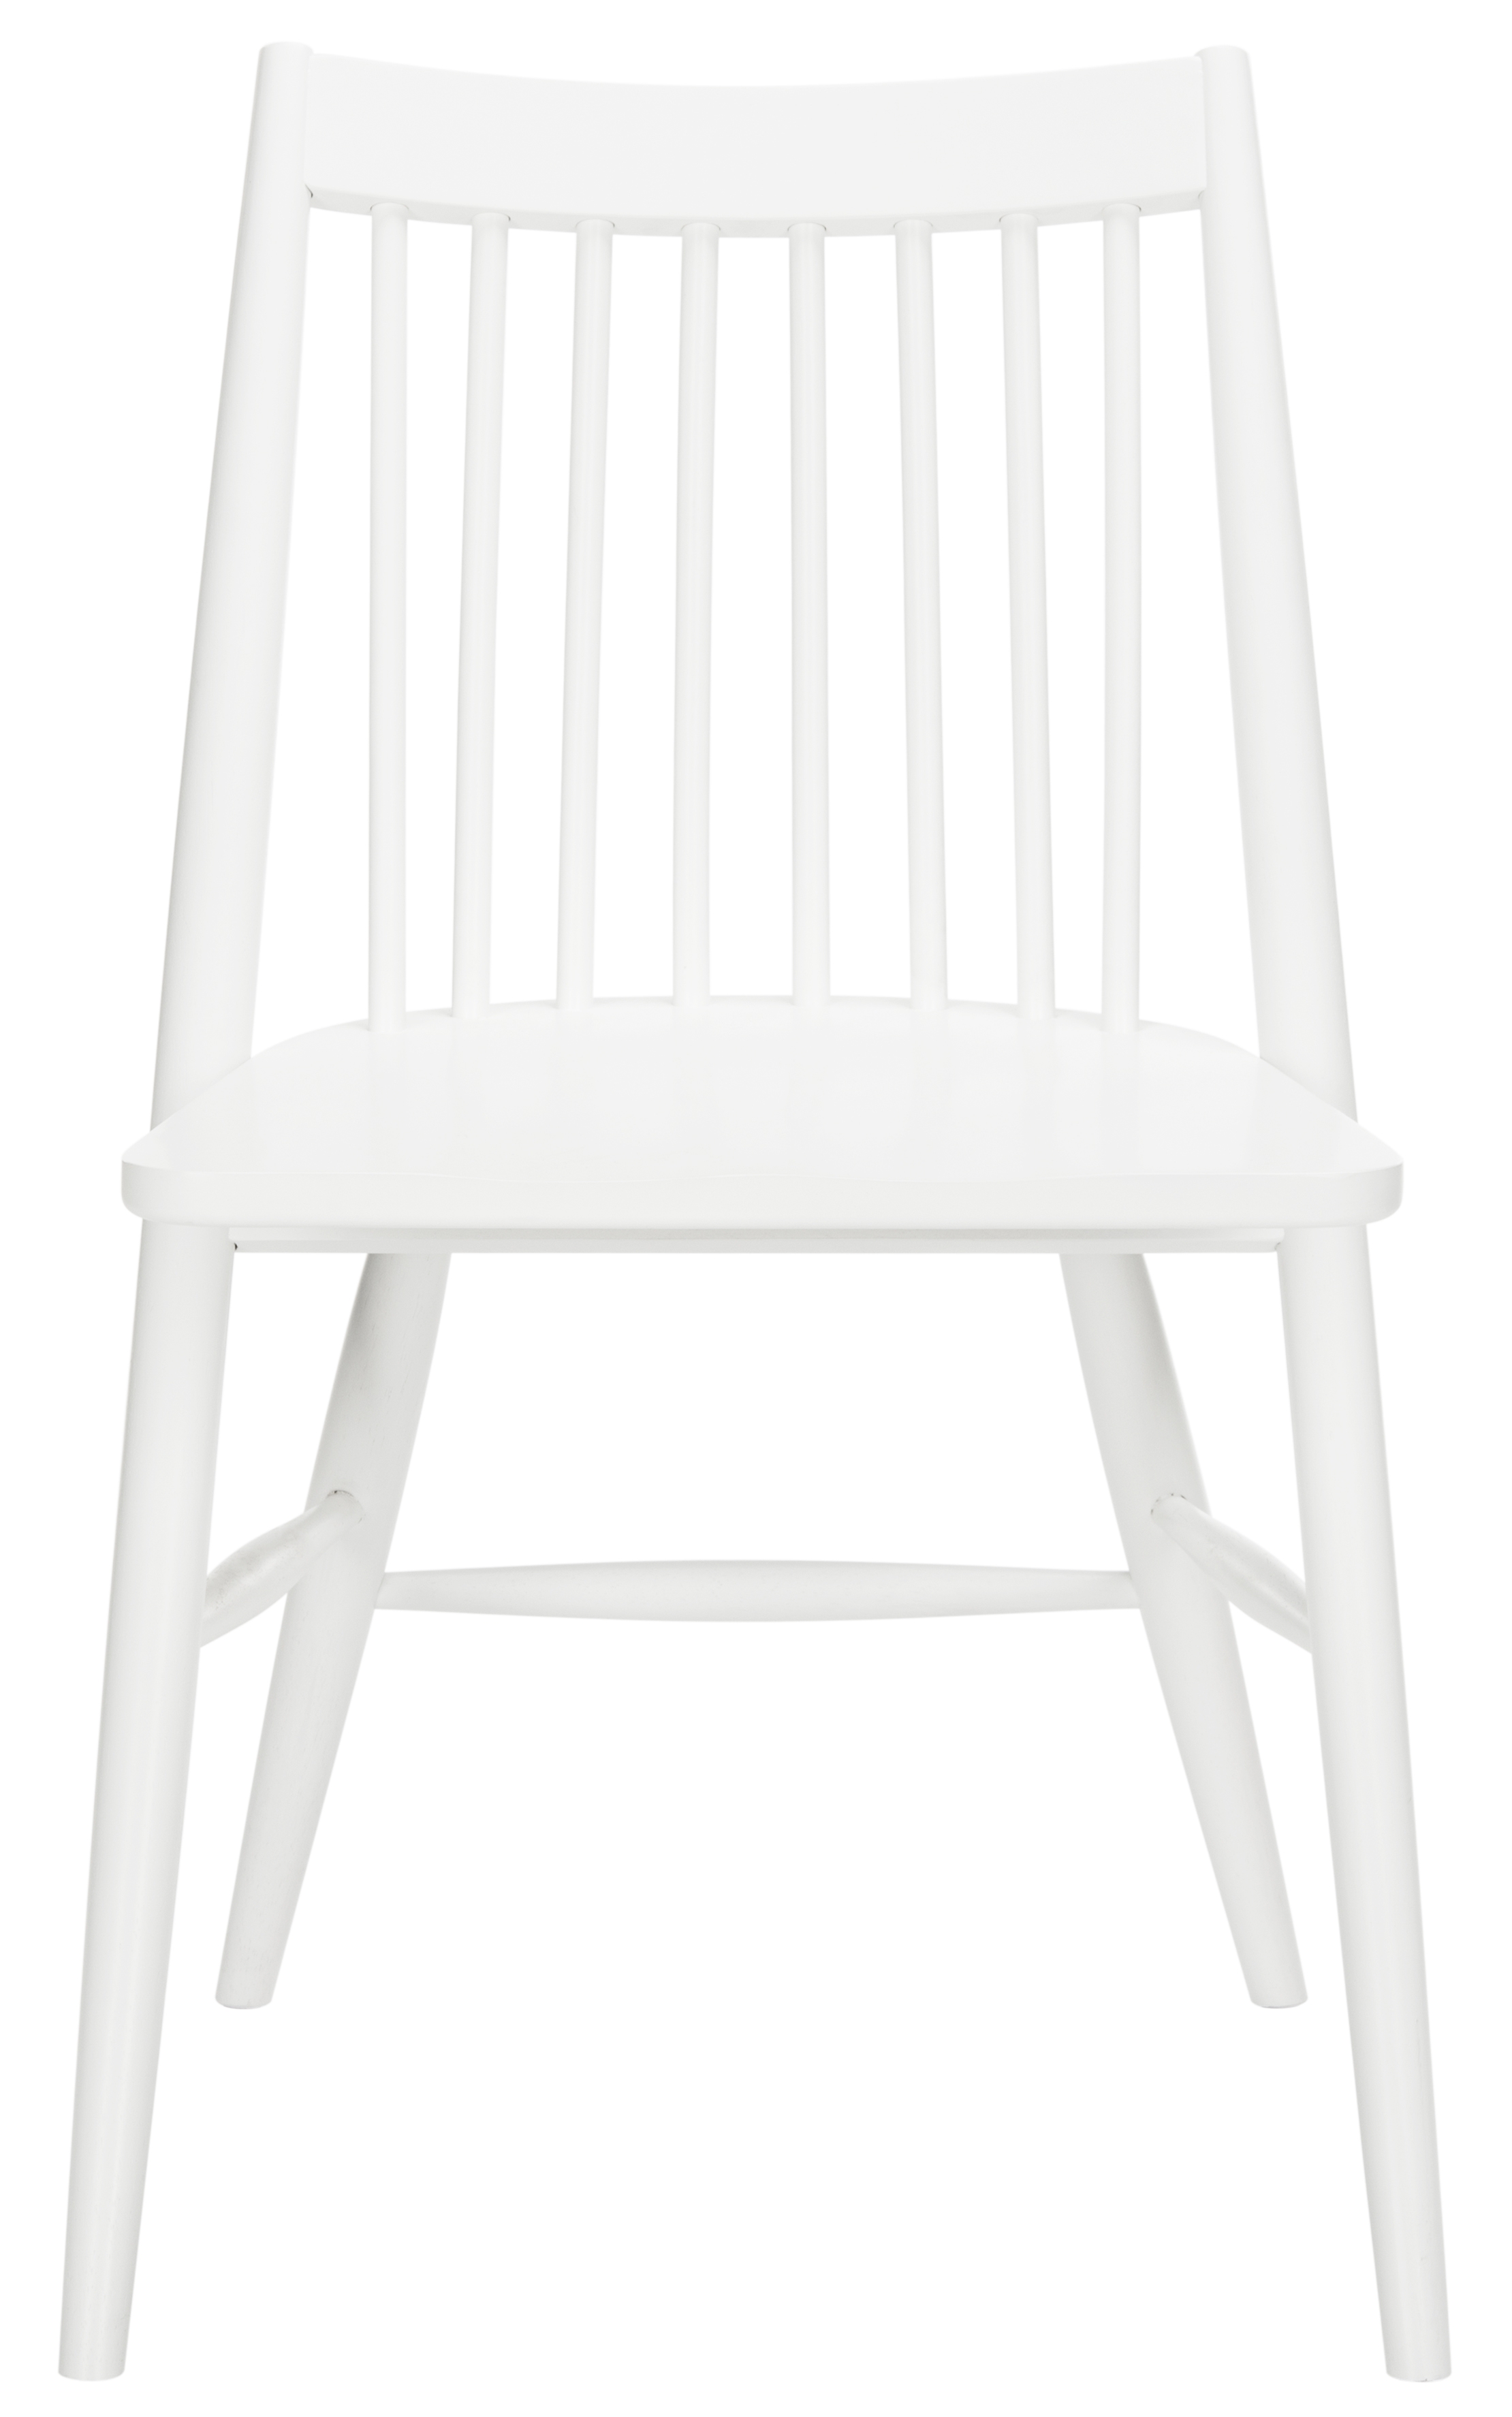 Ames Chairs, White, Set of 2 - Image 2